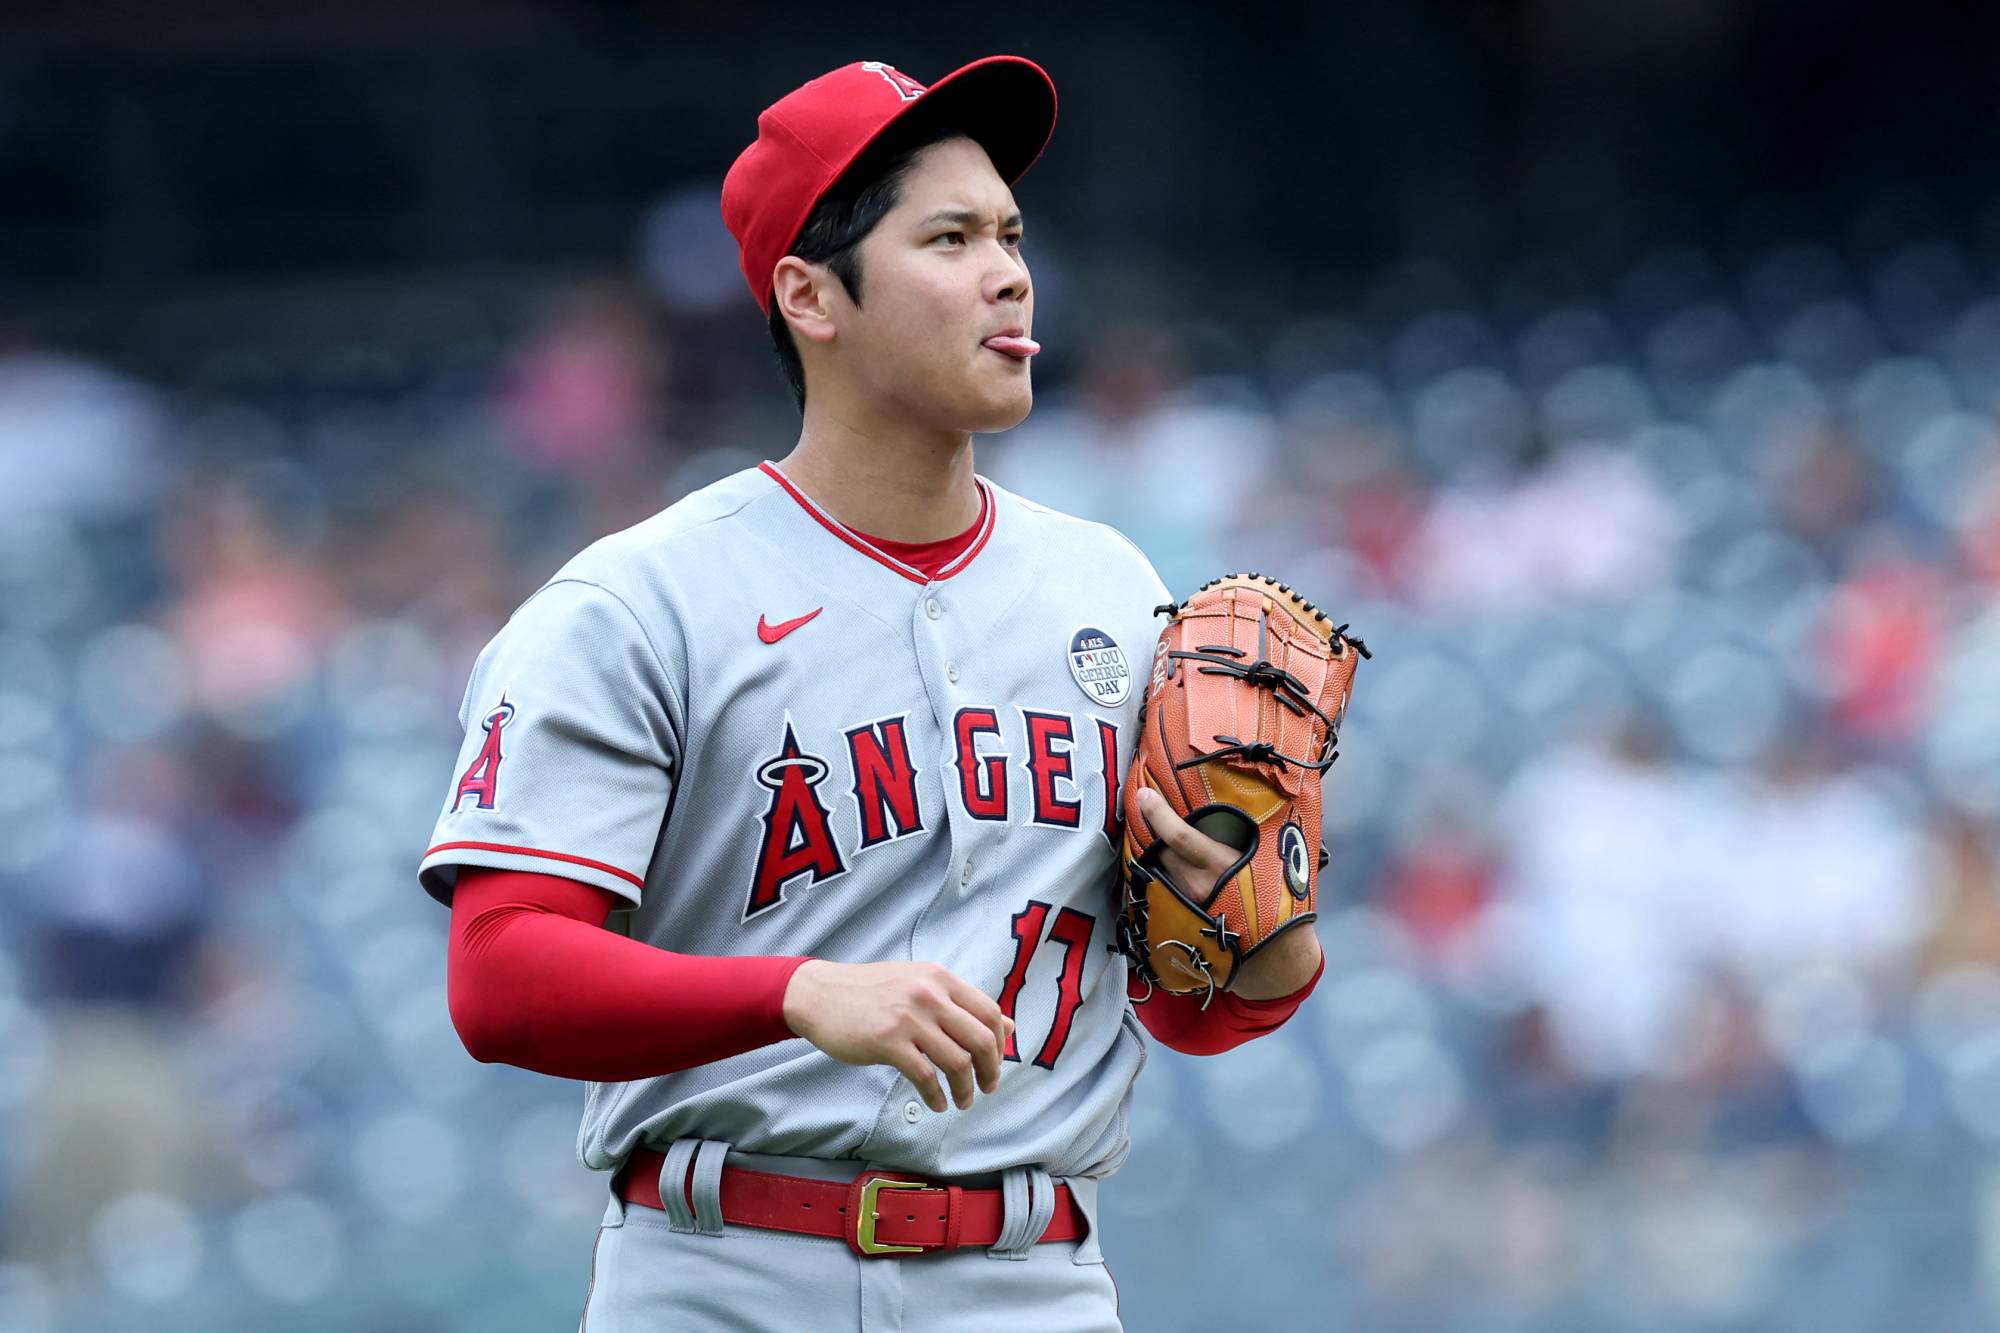 Yankees continue to torment Shohei Ohtani in Bronx - The Japan Times